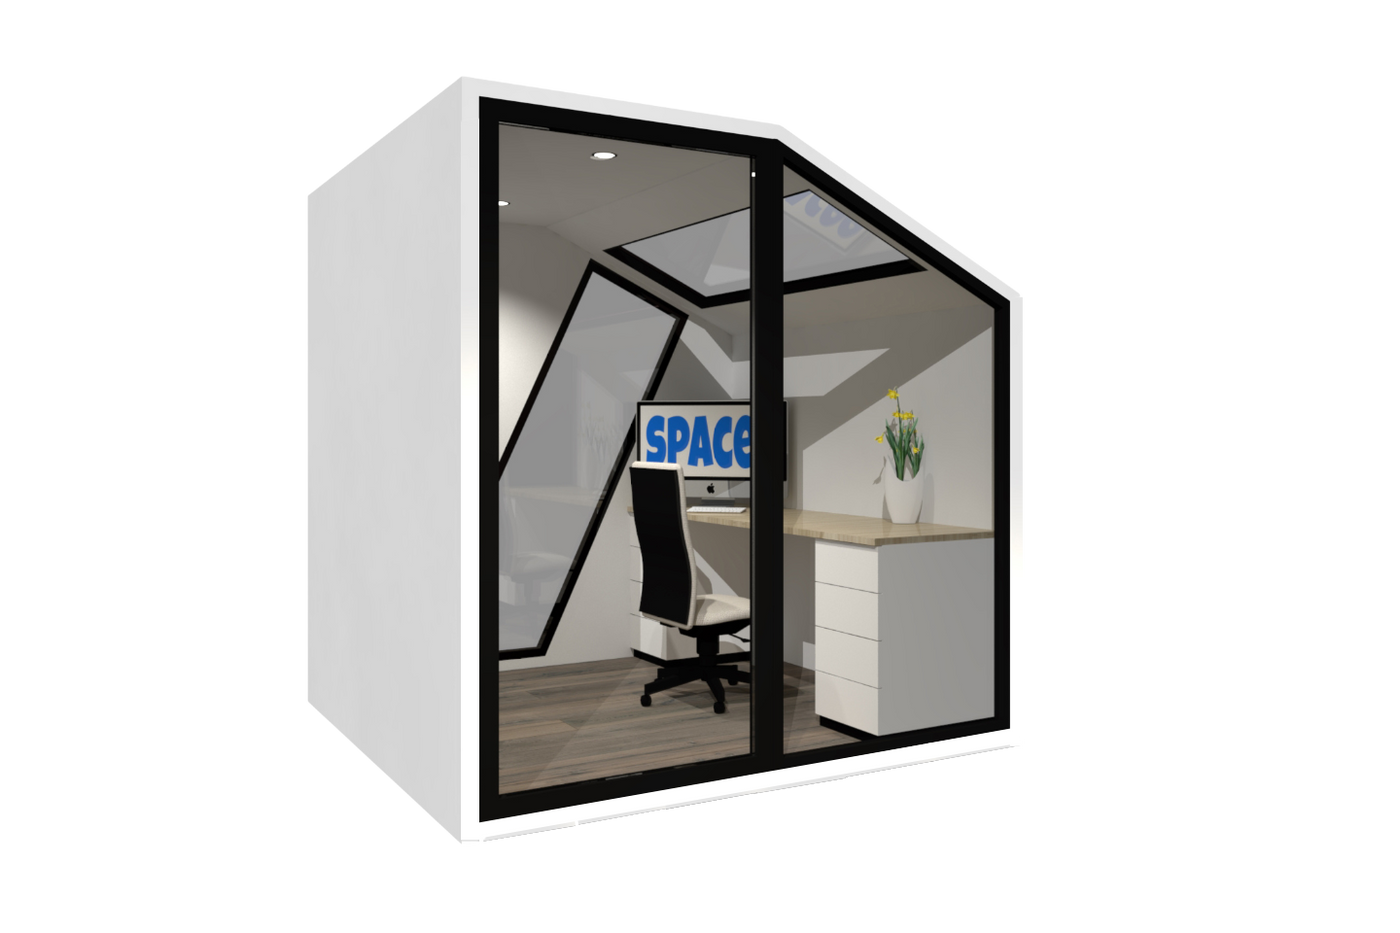 Sky Spacee can be used as a home office portable building featuring a sky light and desk area